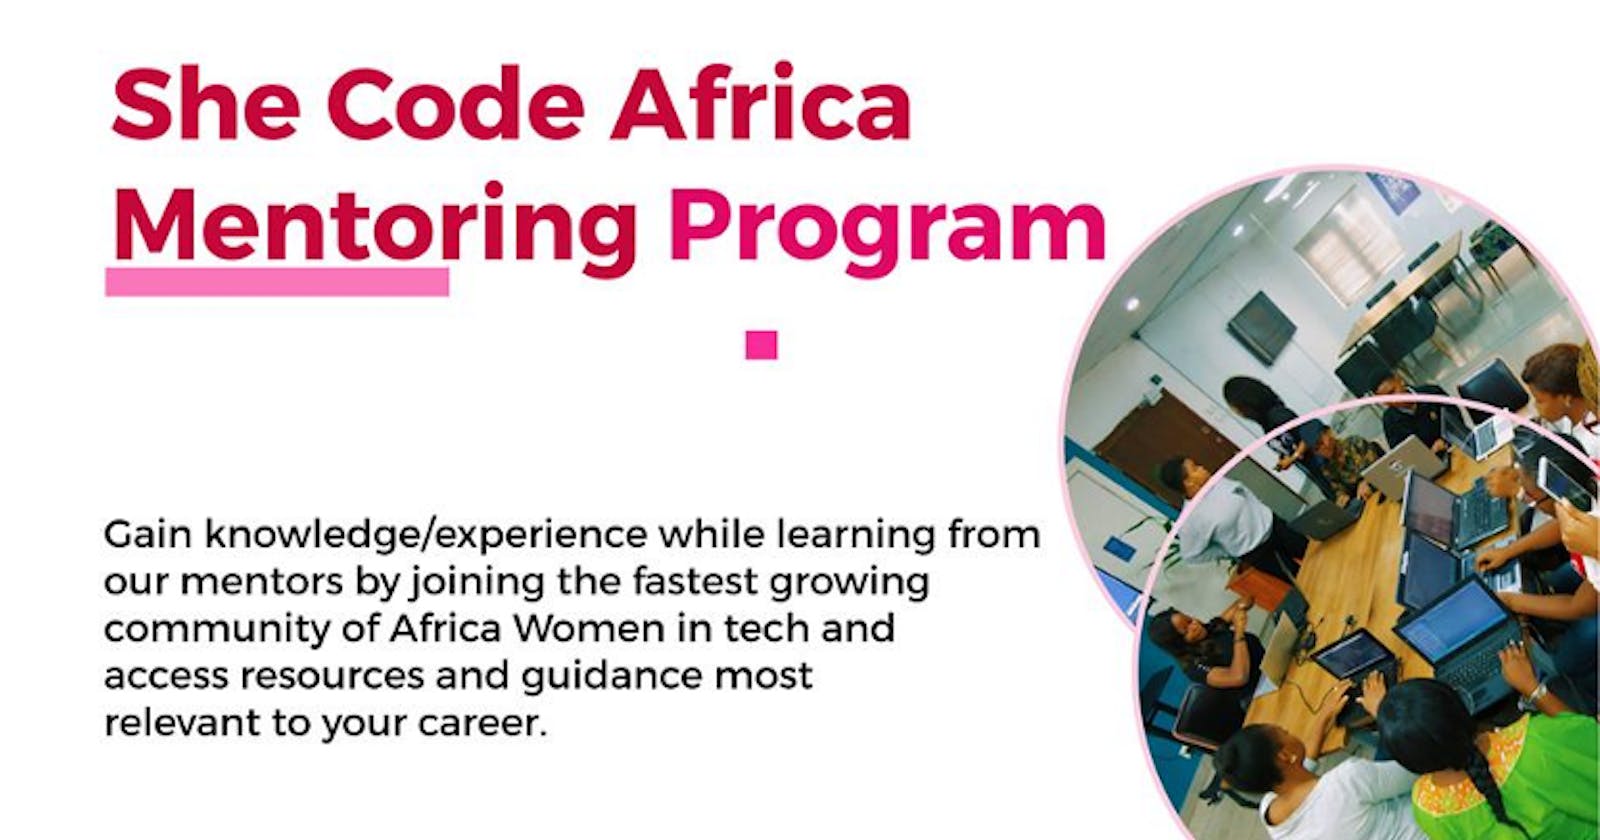 3 months of Python at She Code Africa